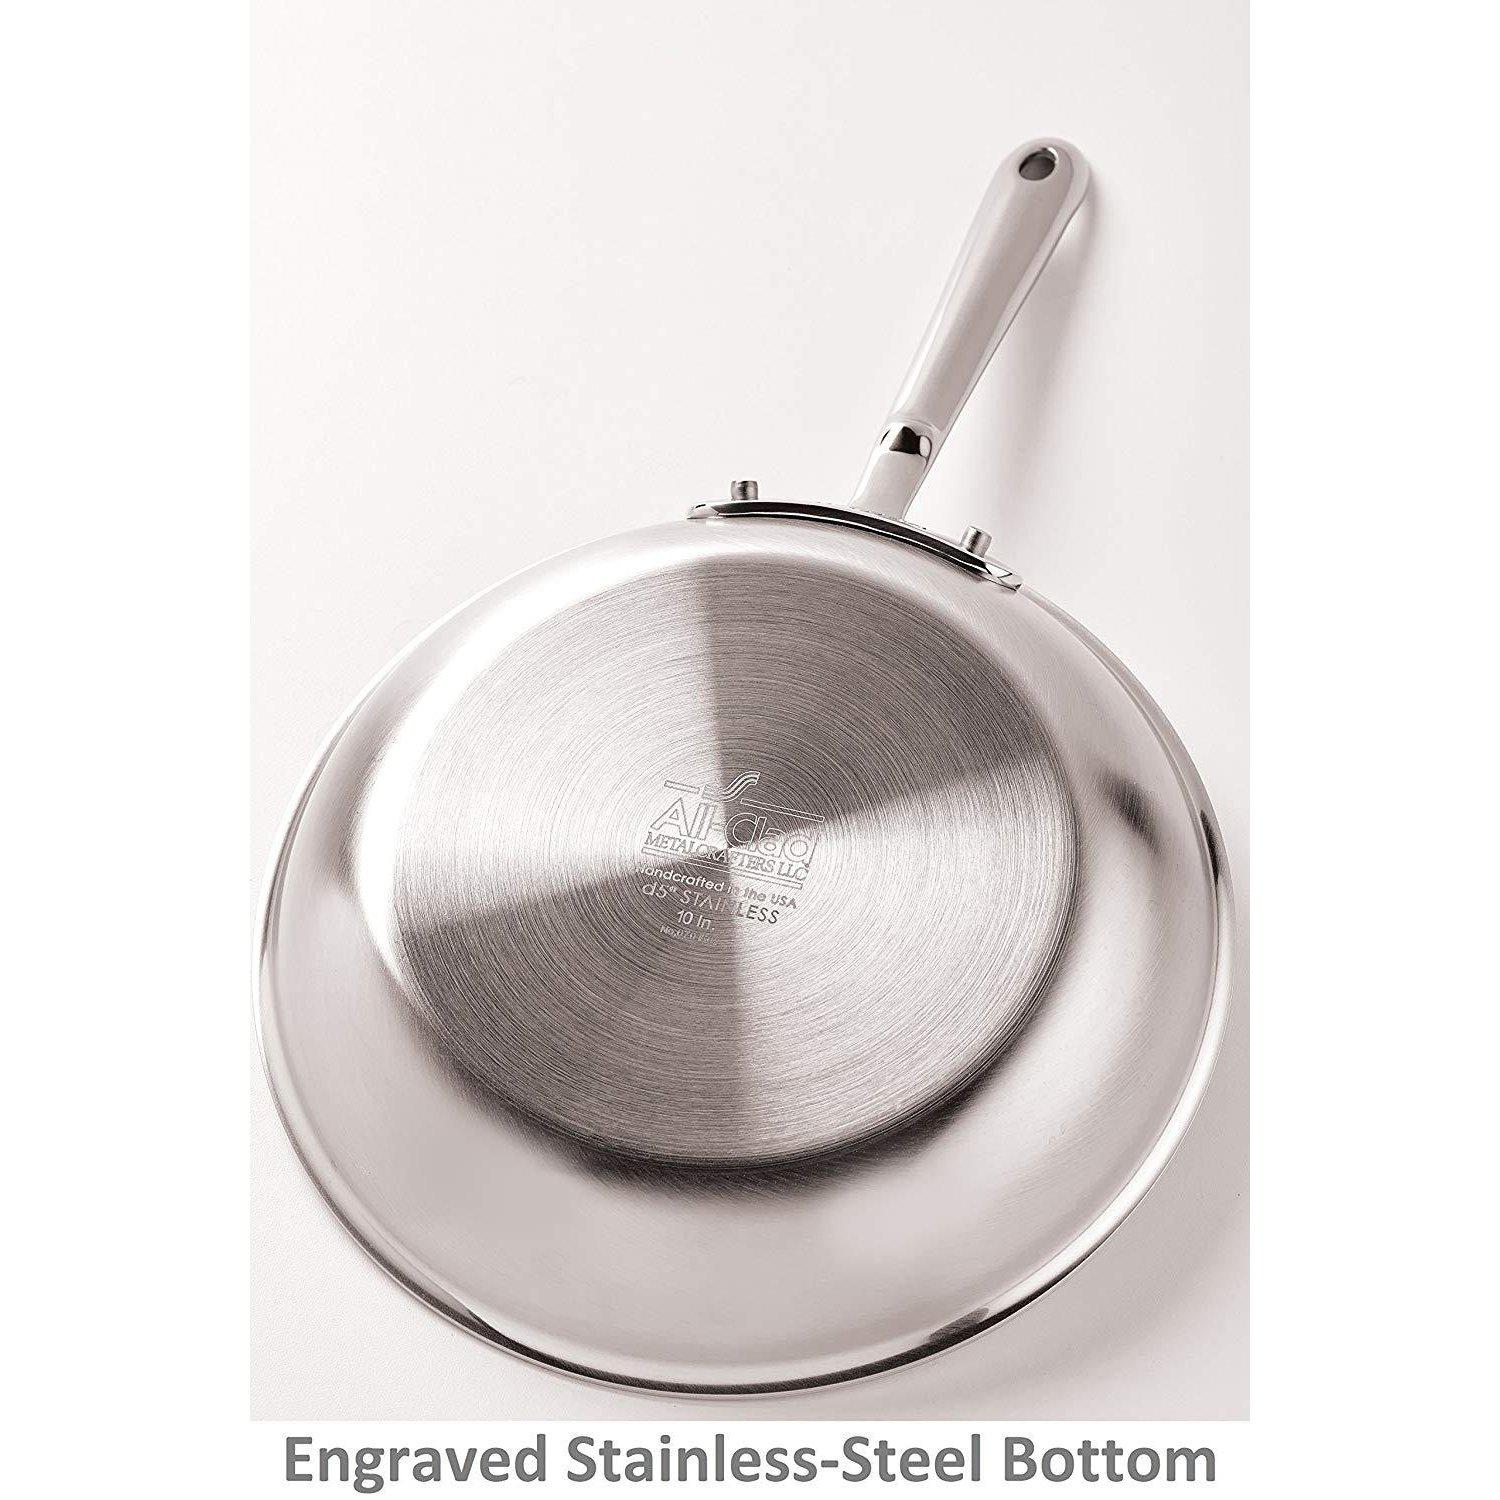 Engraved Stainless Steel Bottom Canada